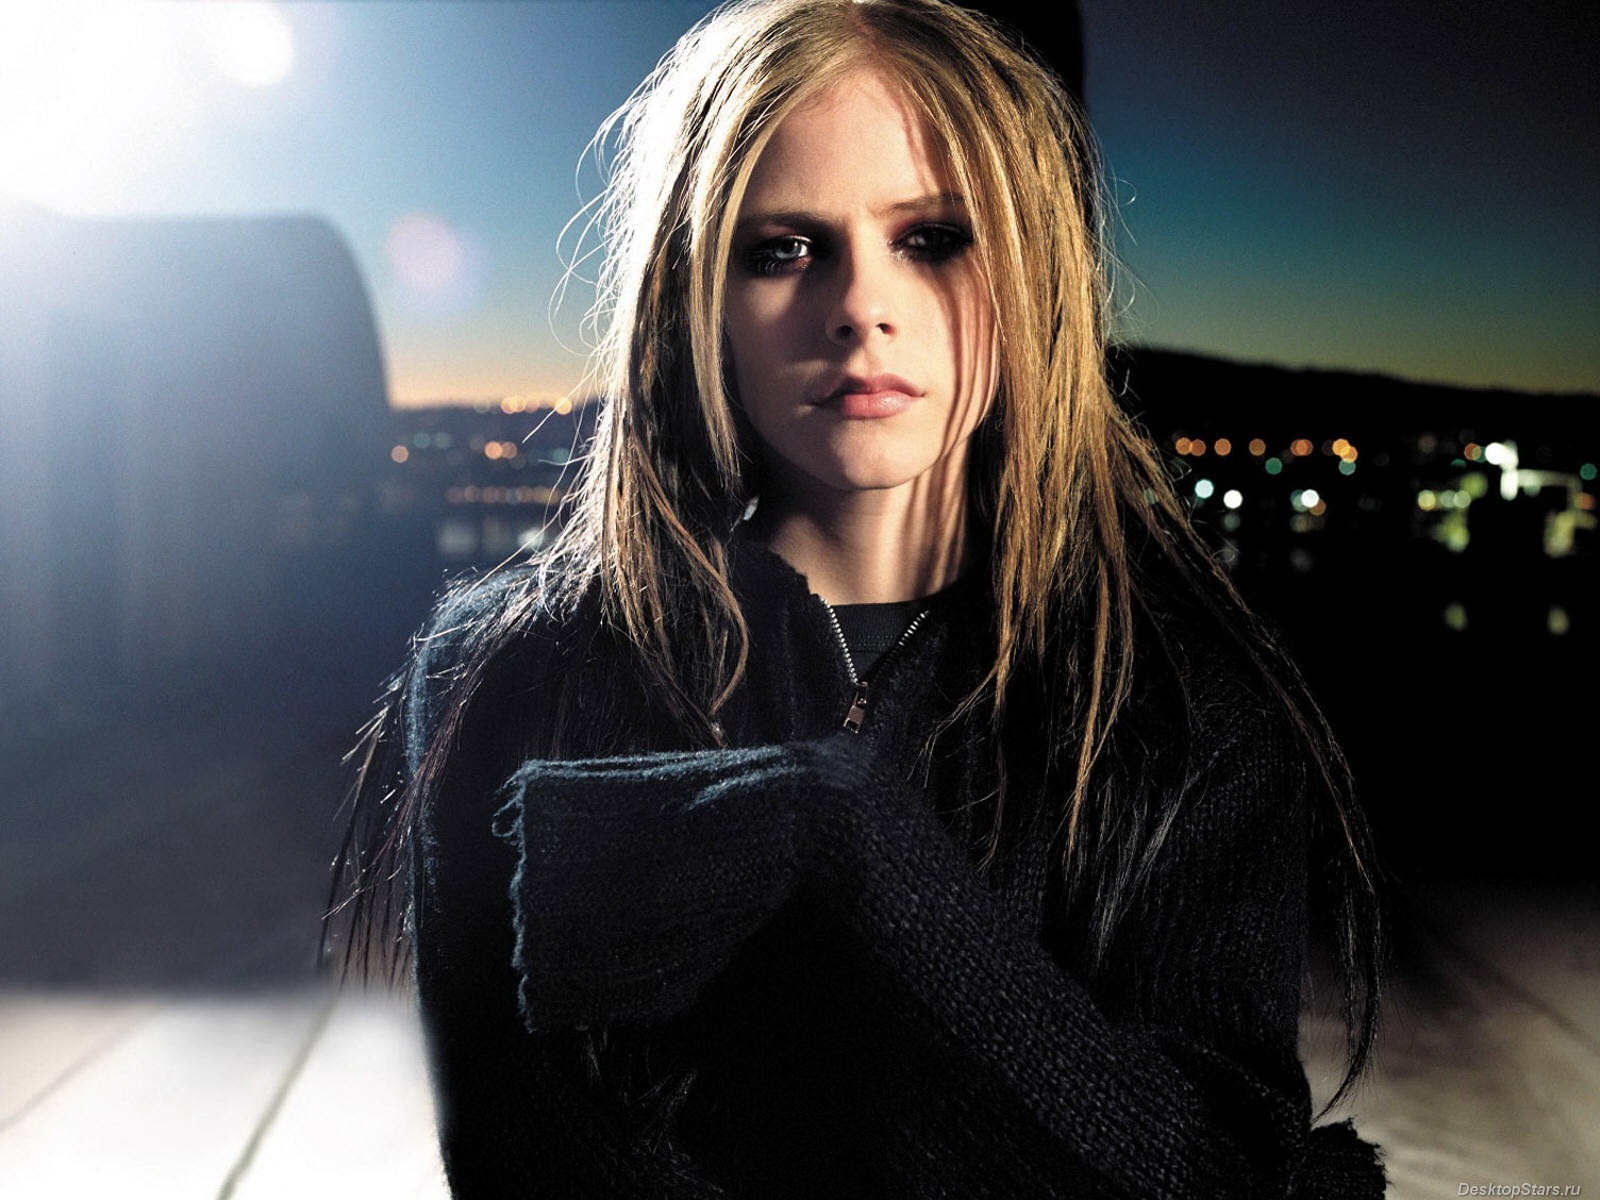 Avril Lavigne #024 - 1600x1200 Wallpapers Pictures Photos Images